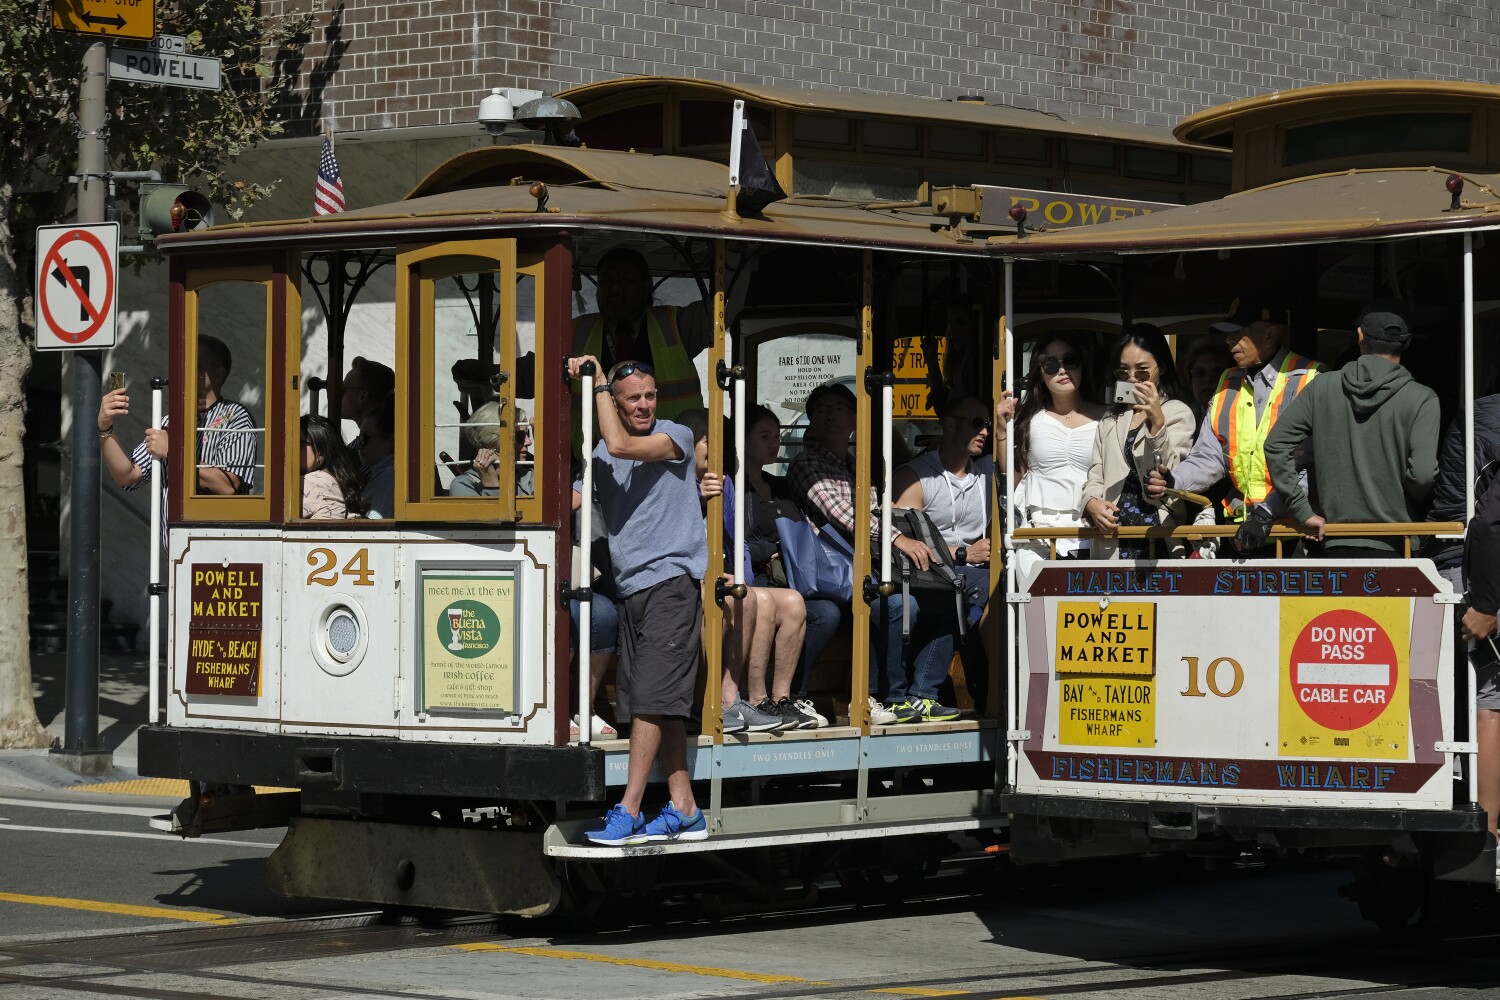 Cable cars to return to San Francisco as pandemic ebbs, city reopens